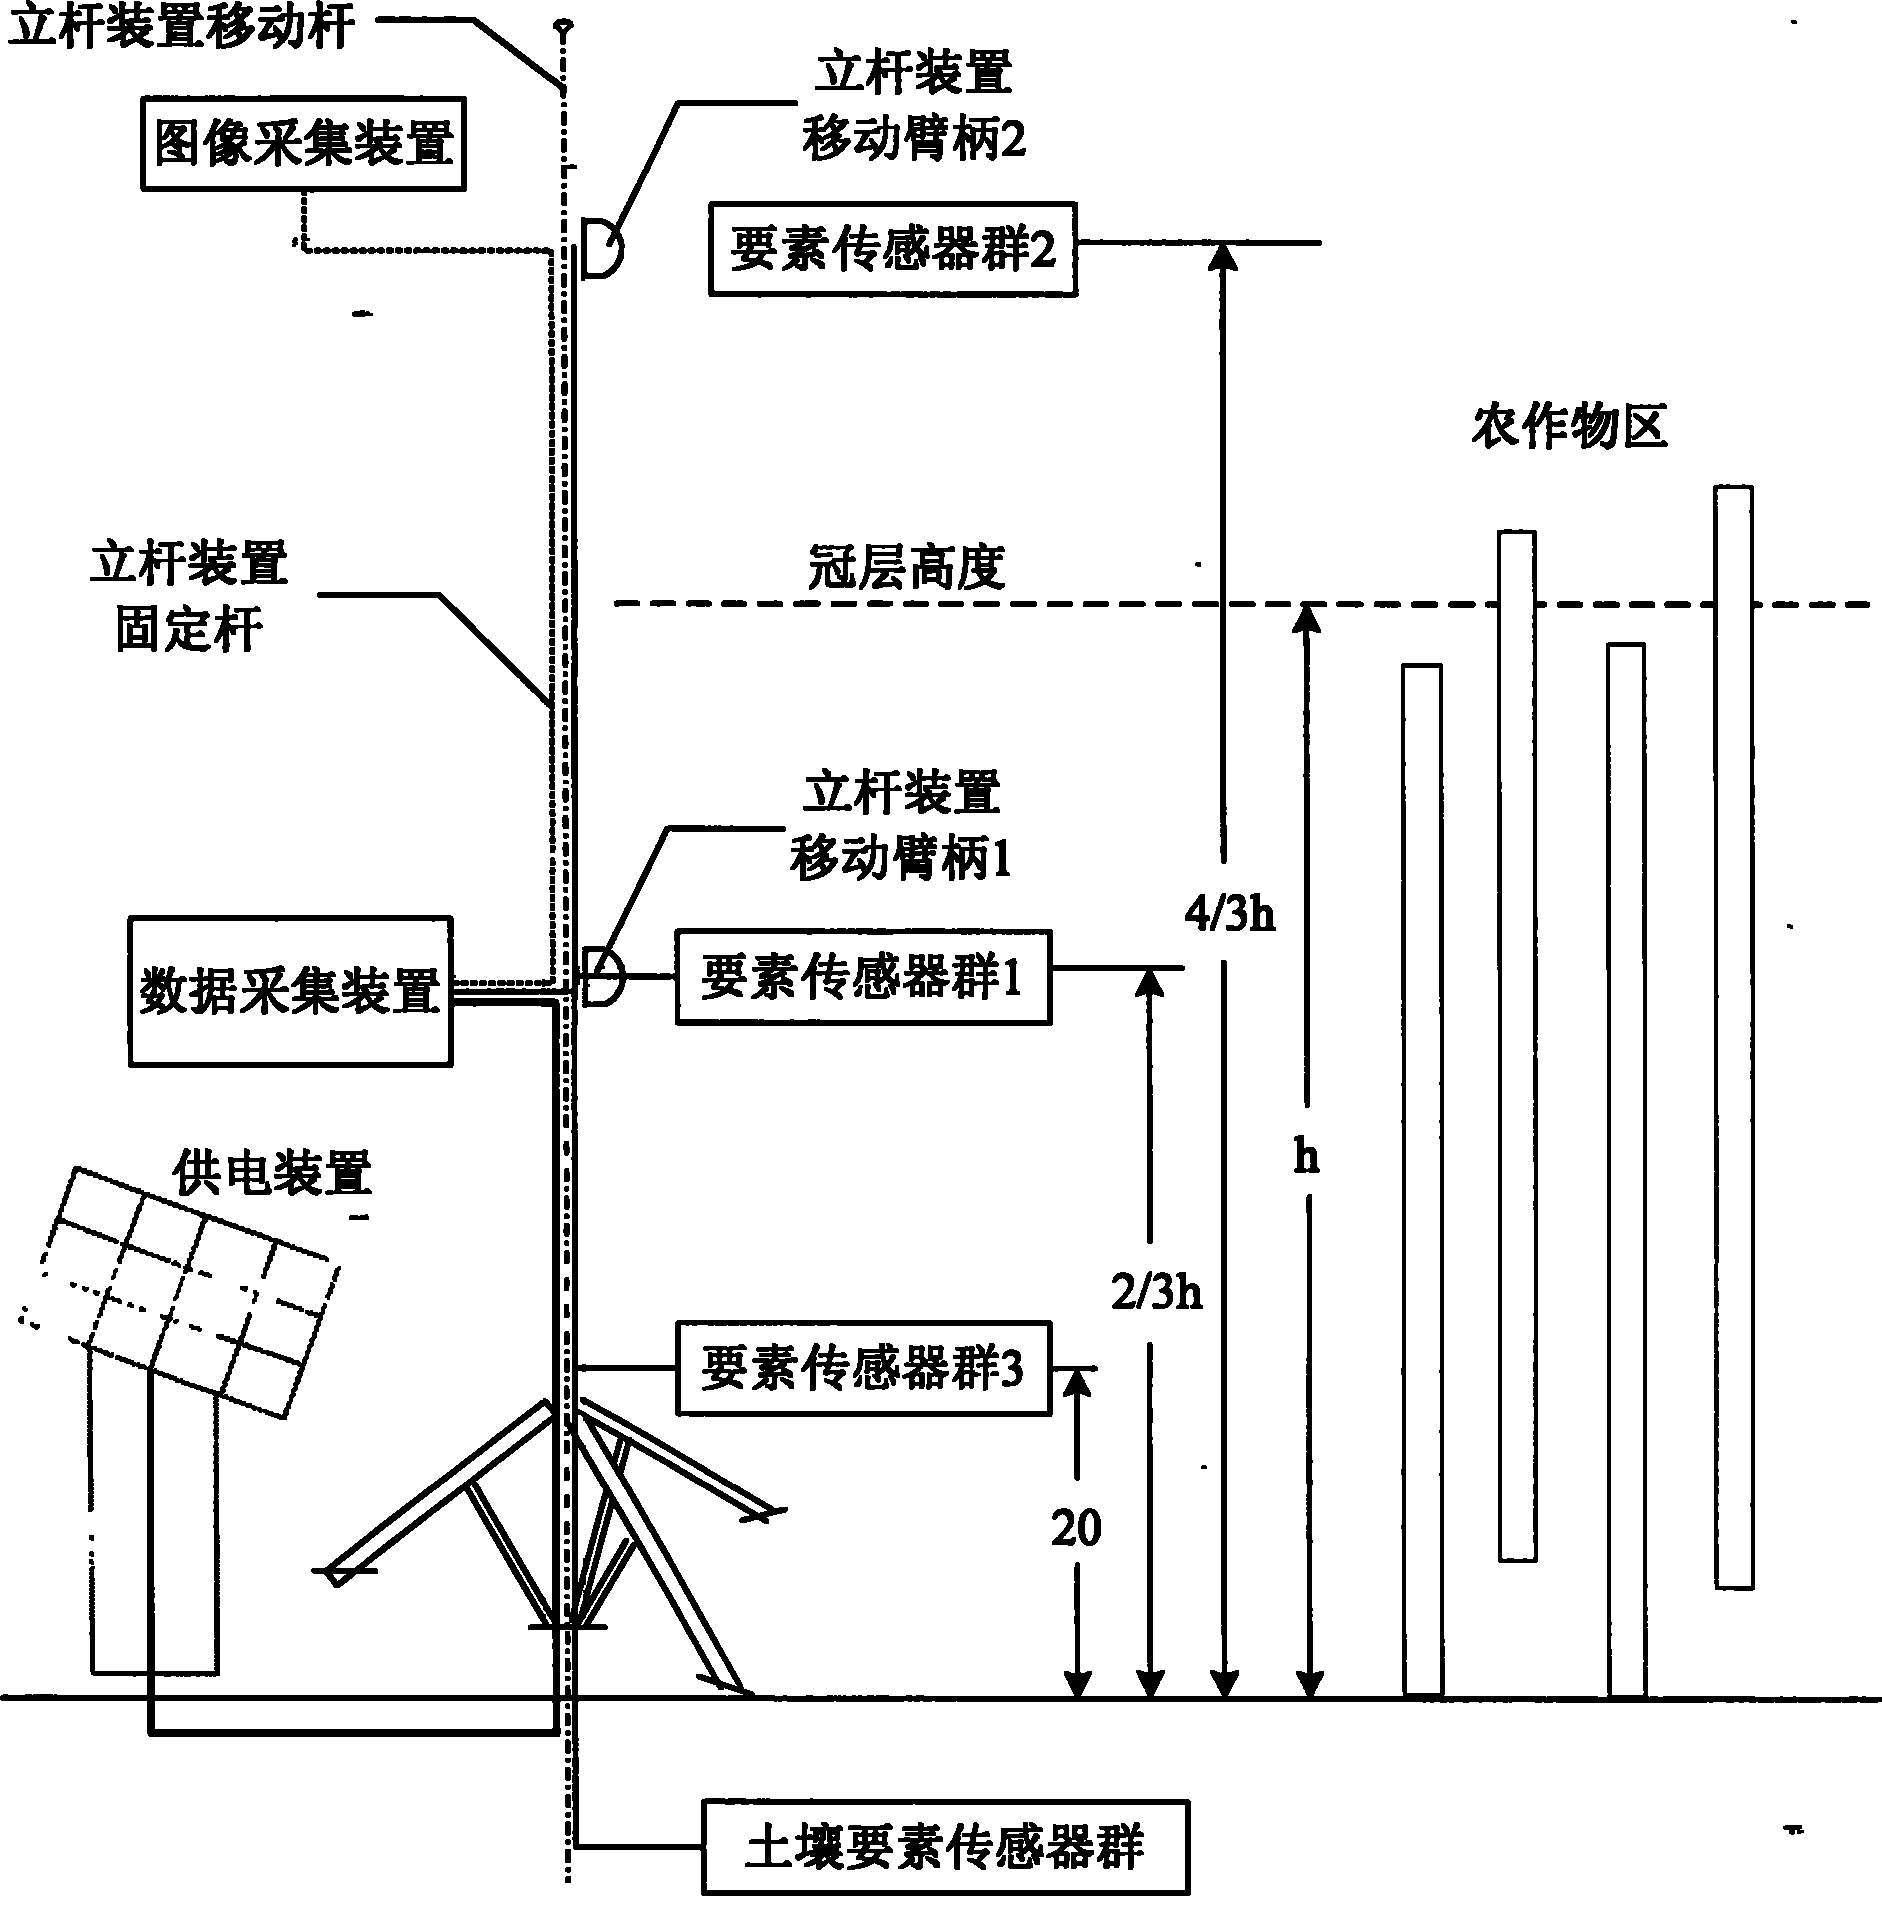 Monitoring system, device and method for microclimate of farm environment